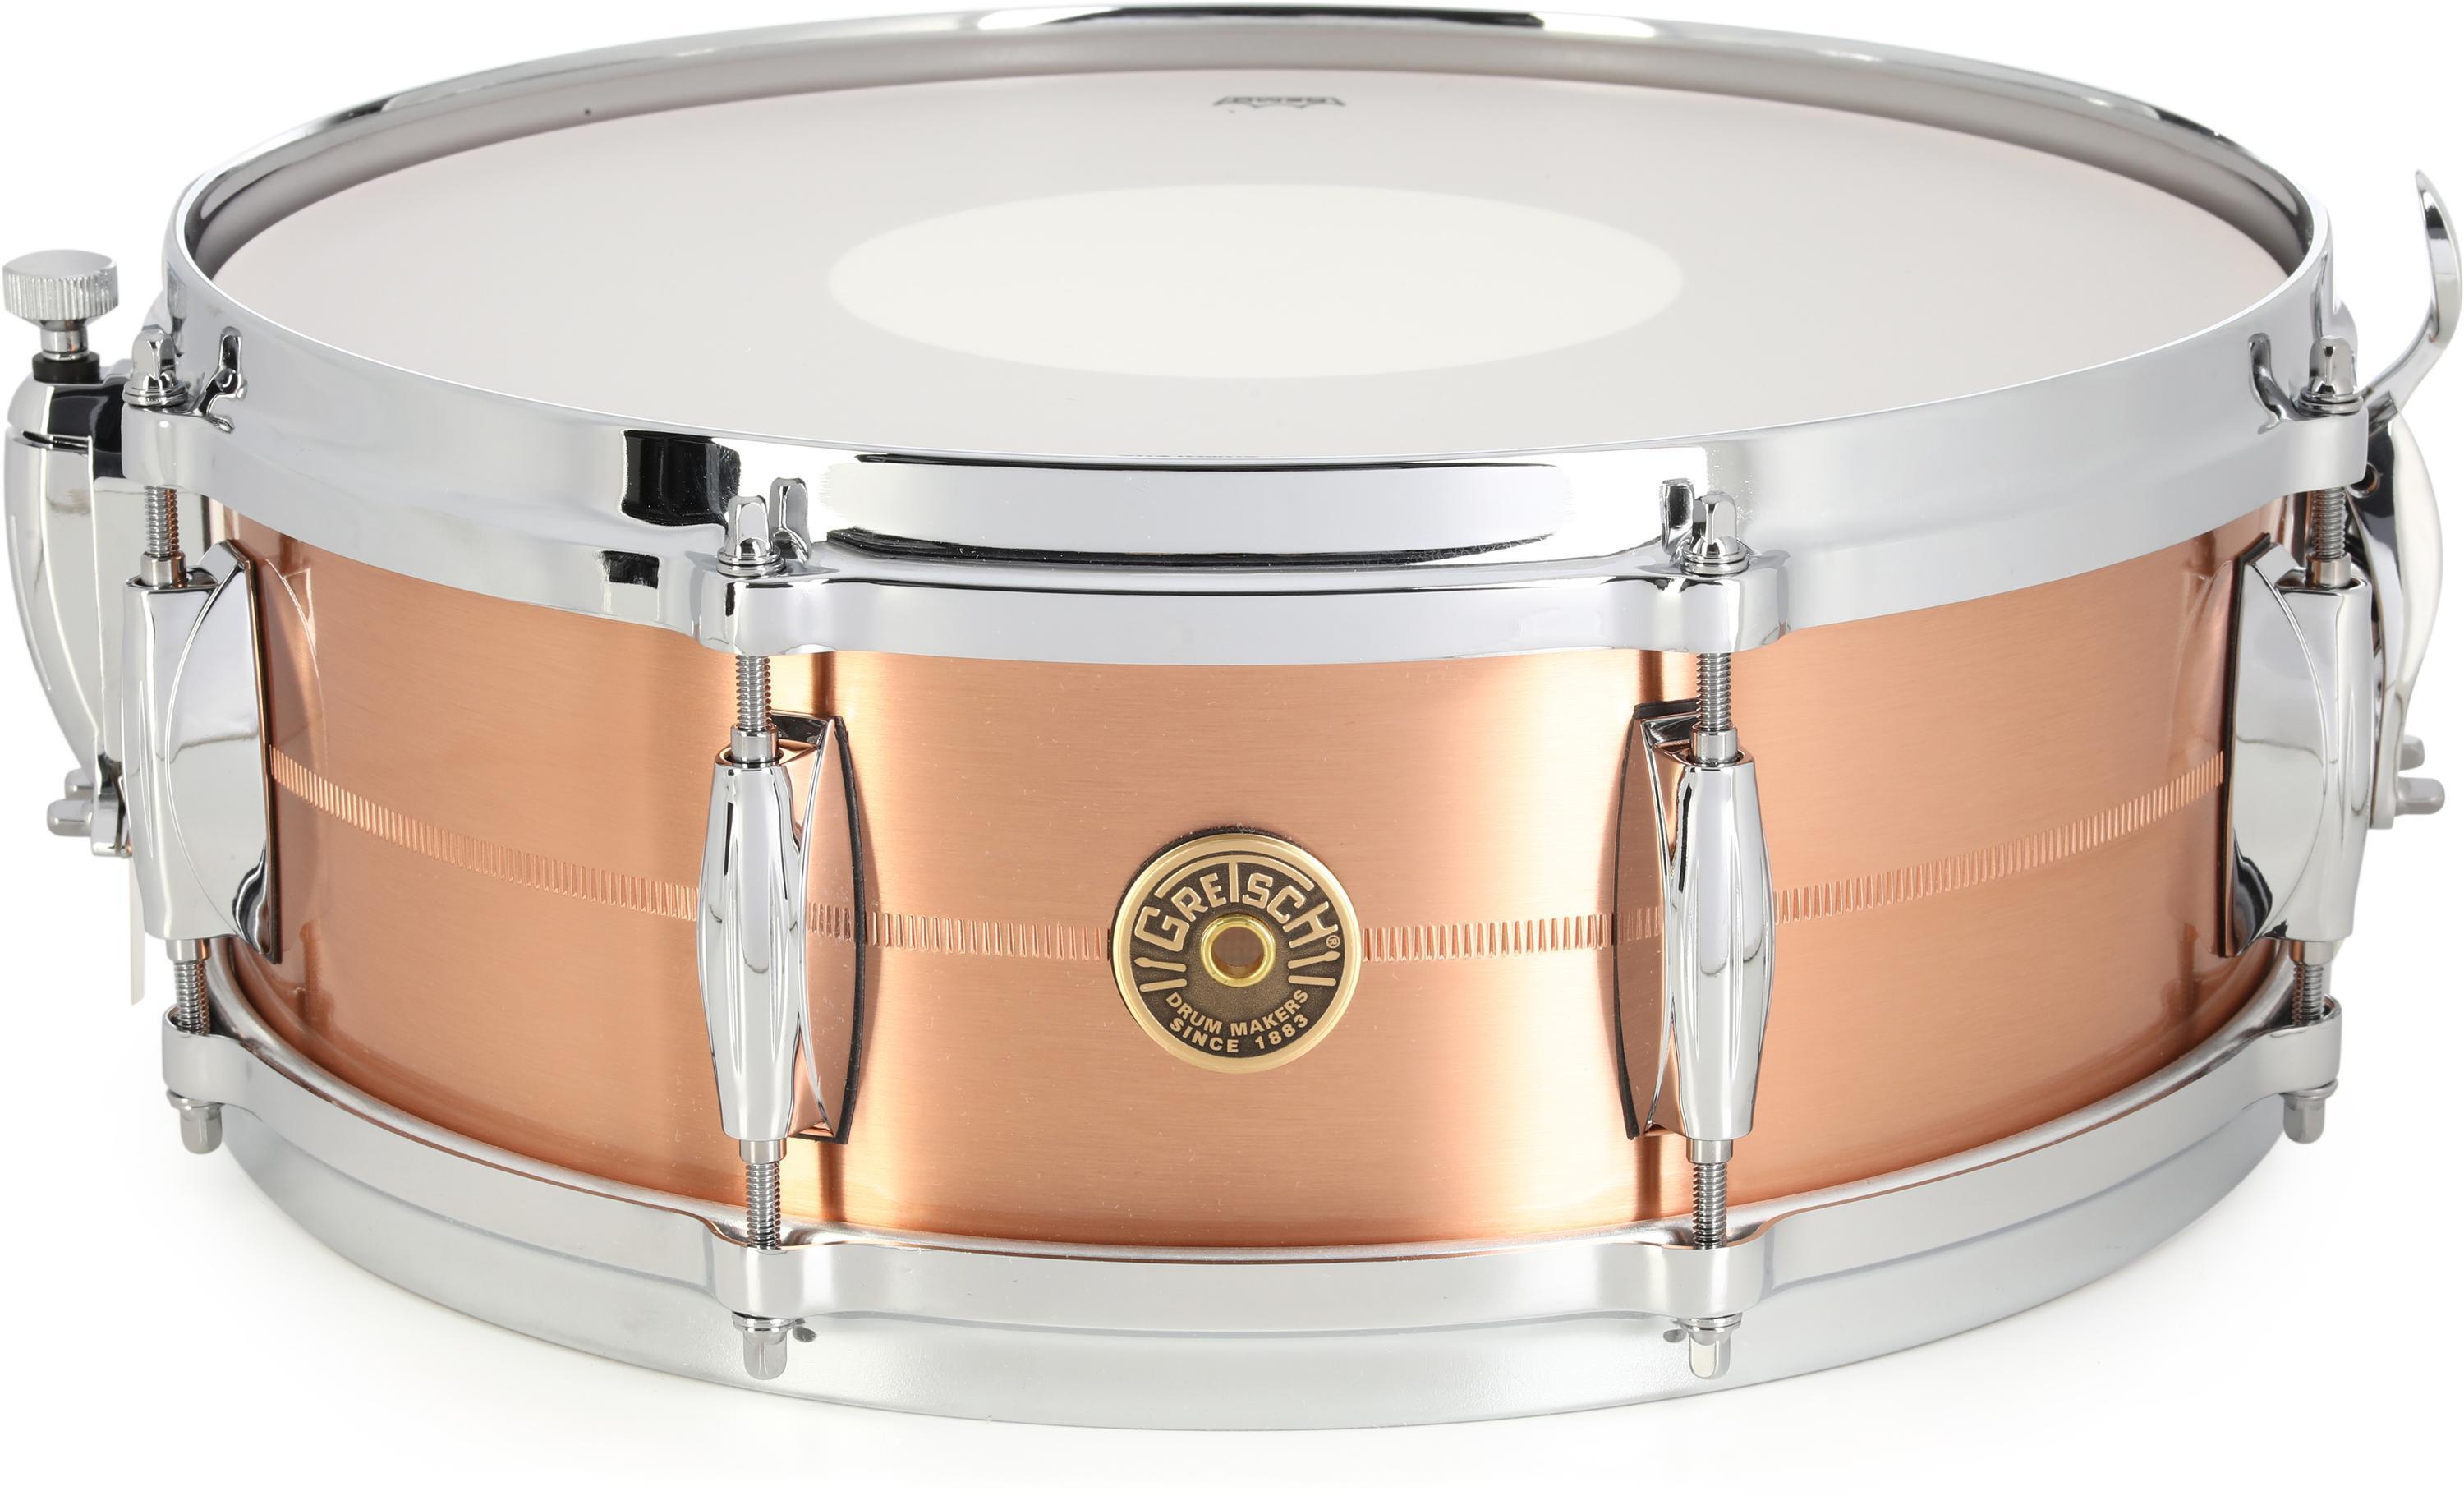 Gretsch Drums C2 2mm Copper Snare Drum - 5 x 14-inch - Brushed